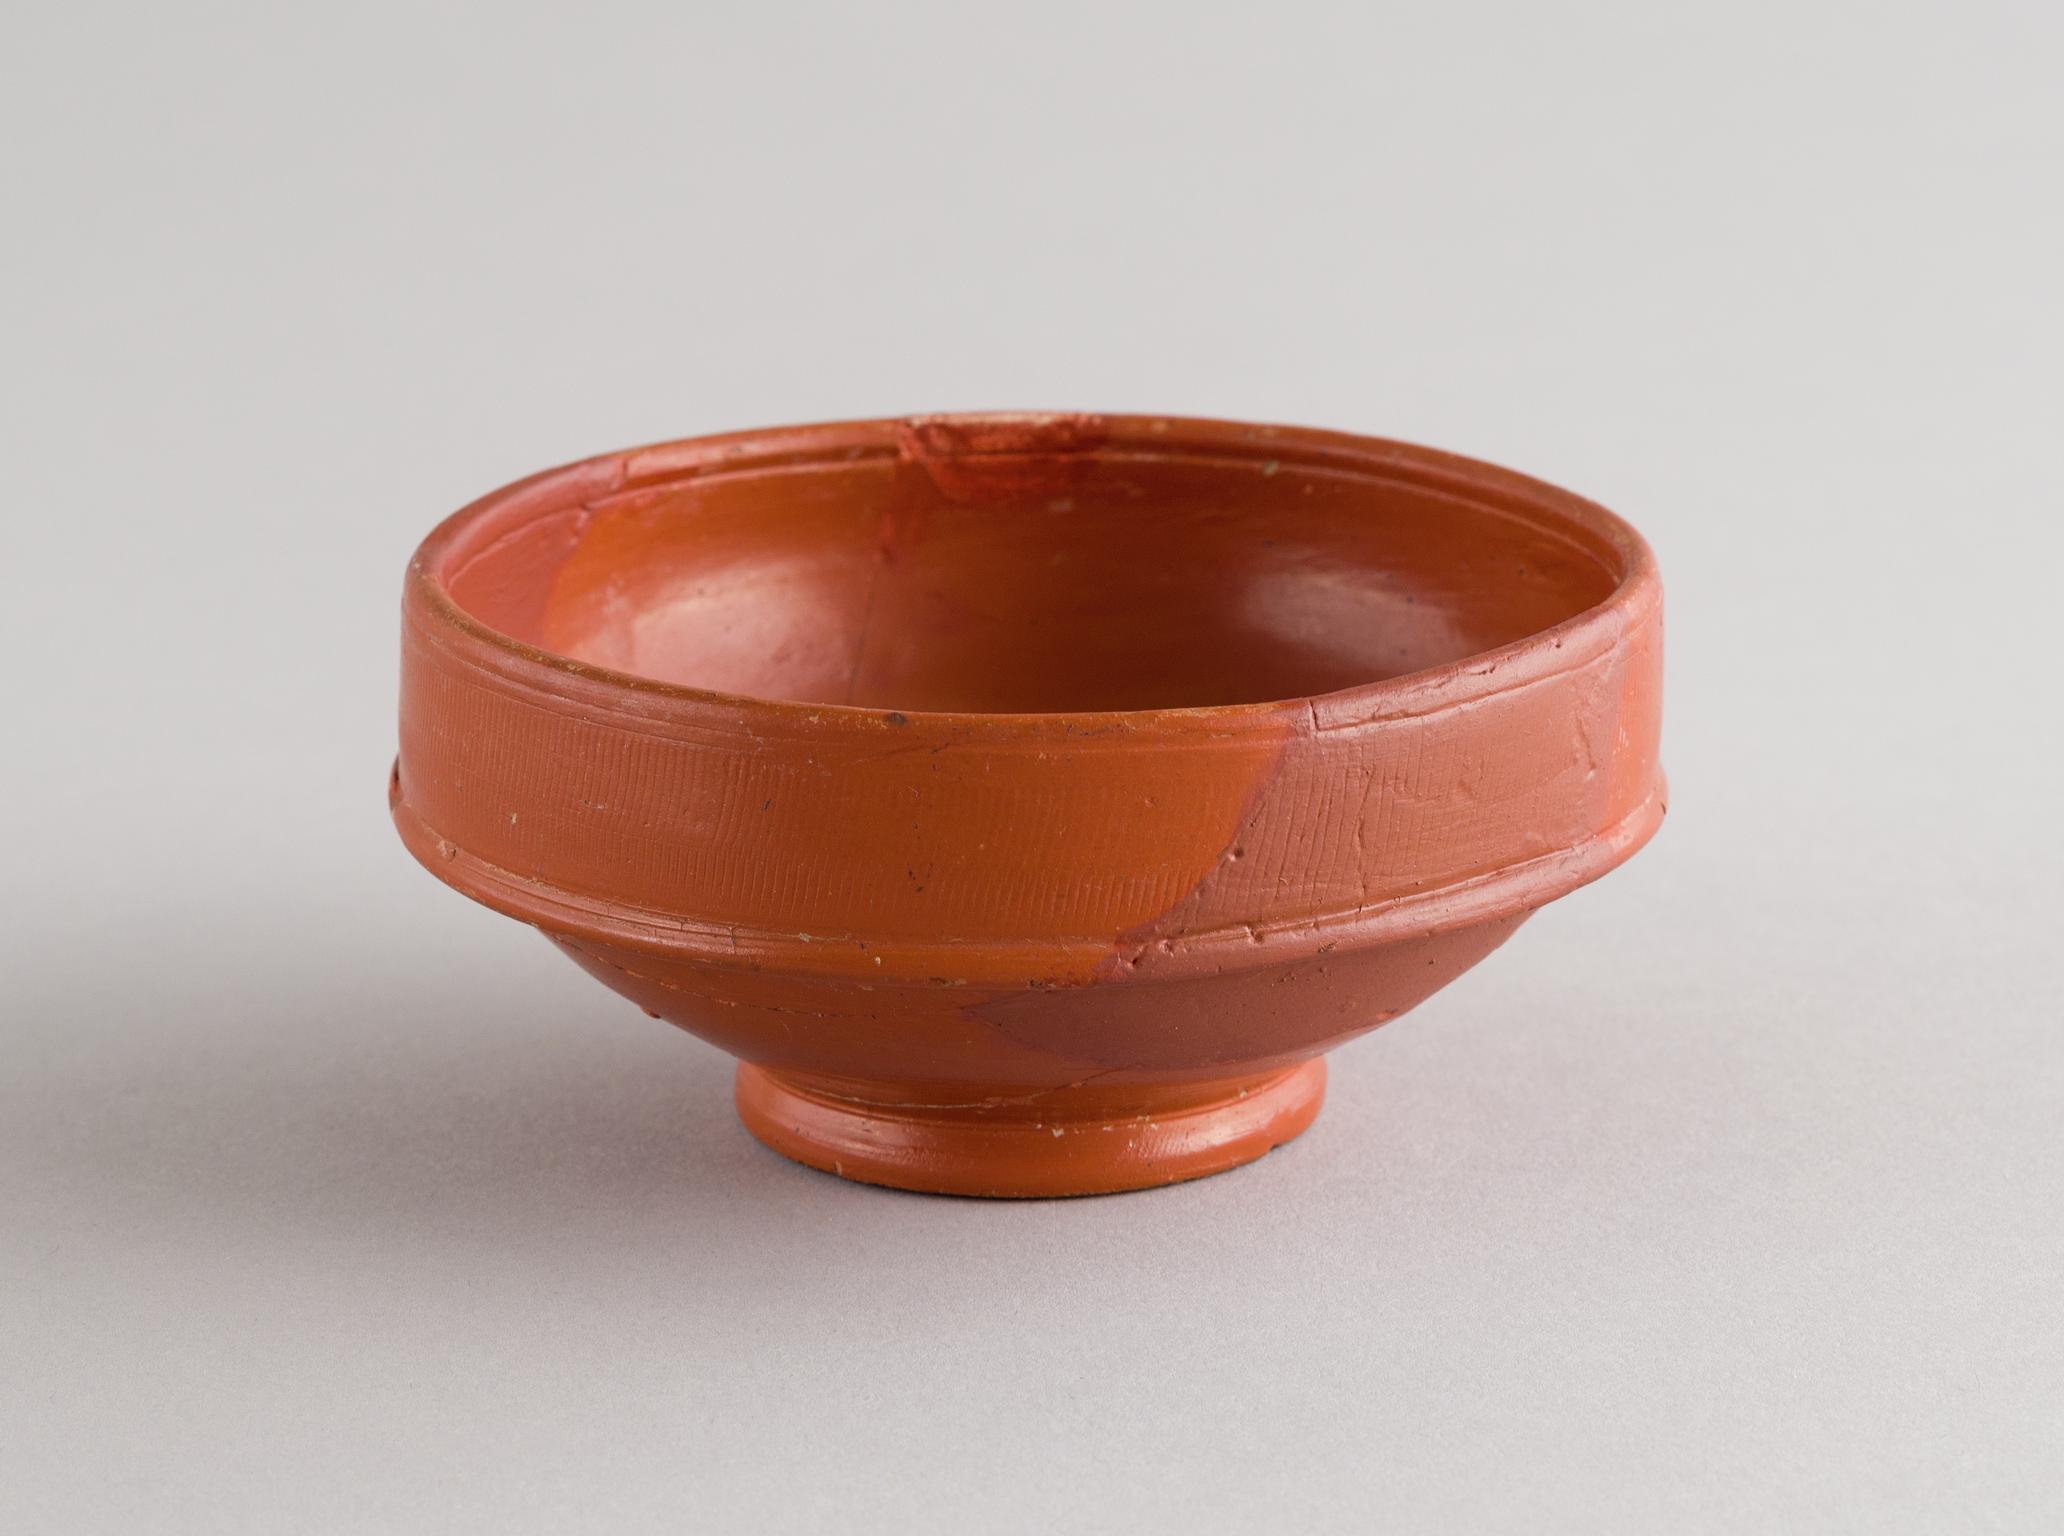 Roman samian cup, stamped